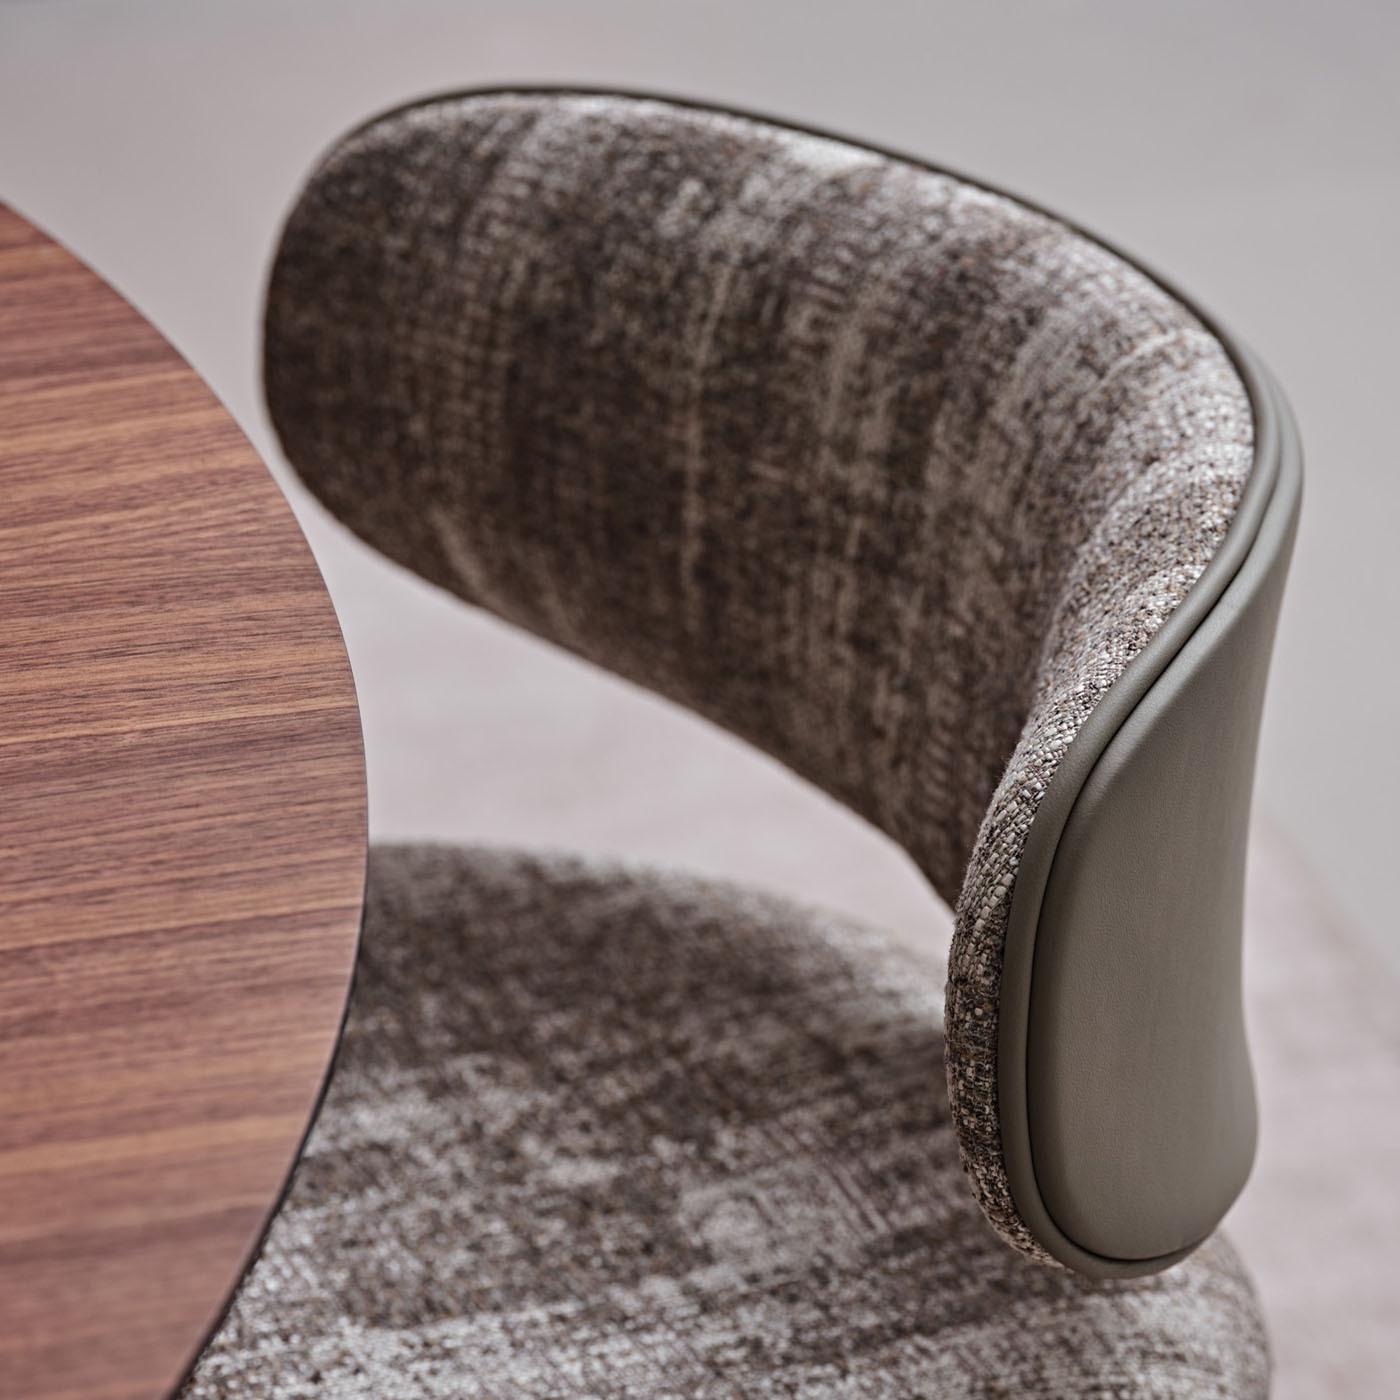 Reinterpreting the look of office designs in a refined sartorial key, this chair will impeccably complement modern decor. The cylindrical metal frame is lacquered in the same mud tone as the leather details accenting the curved beech backrest's back